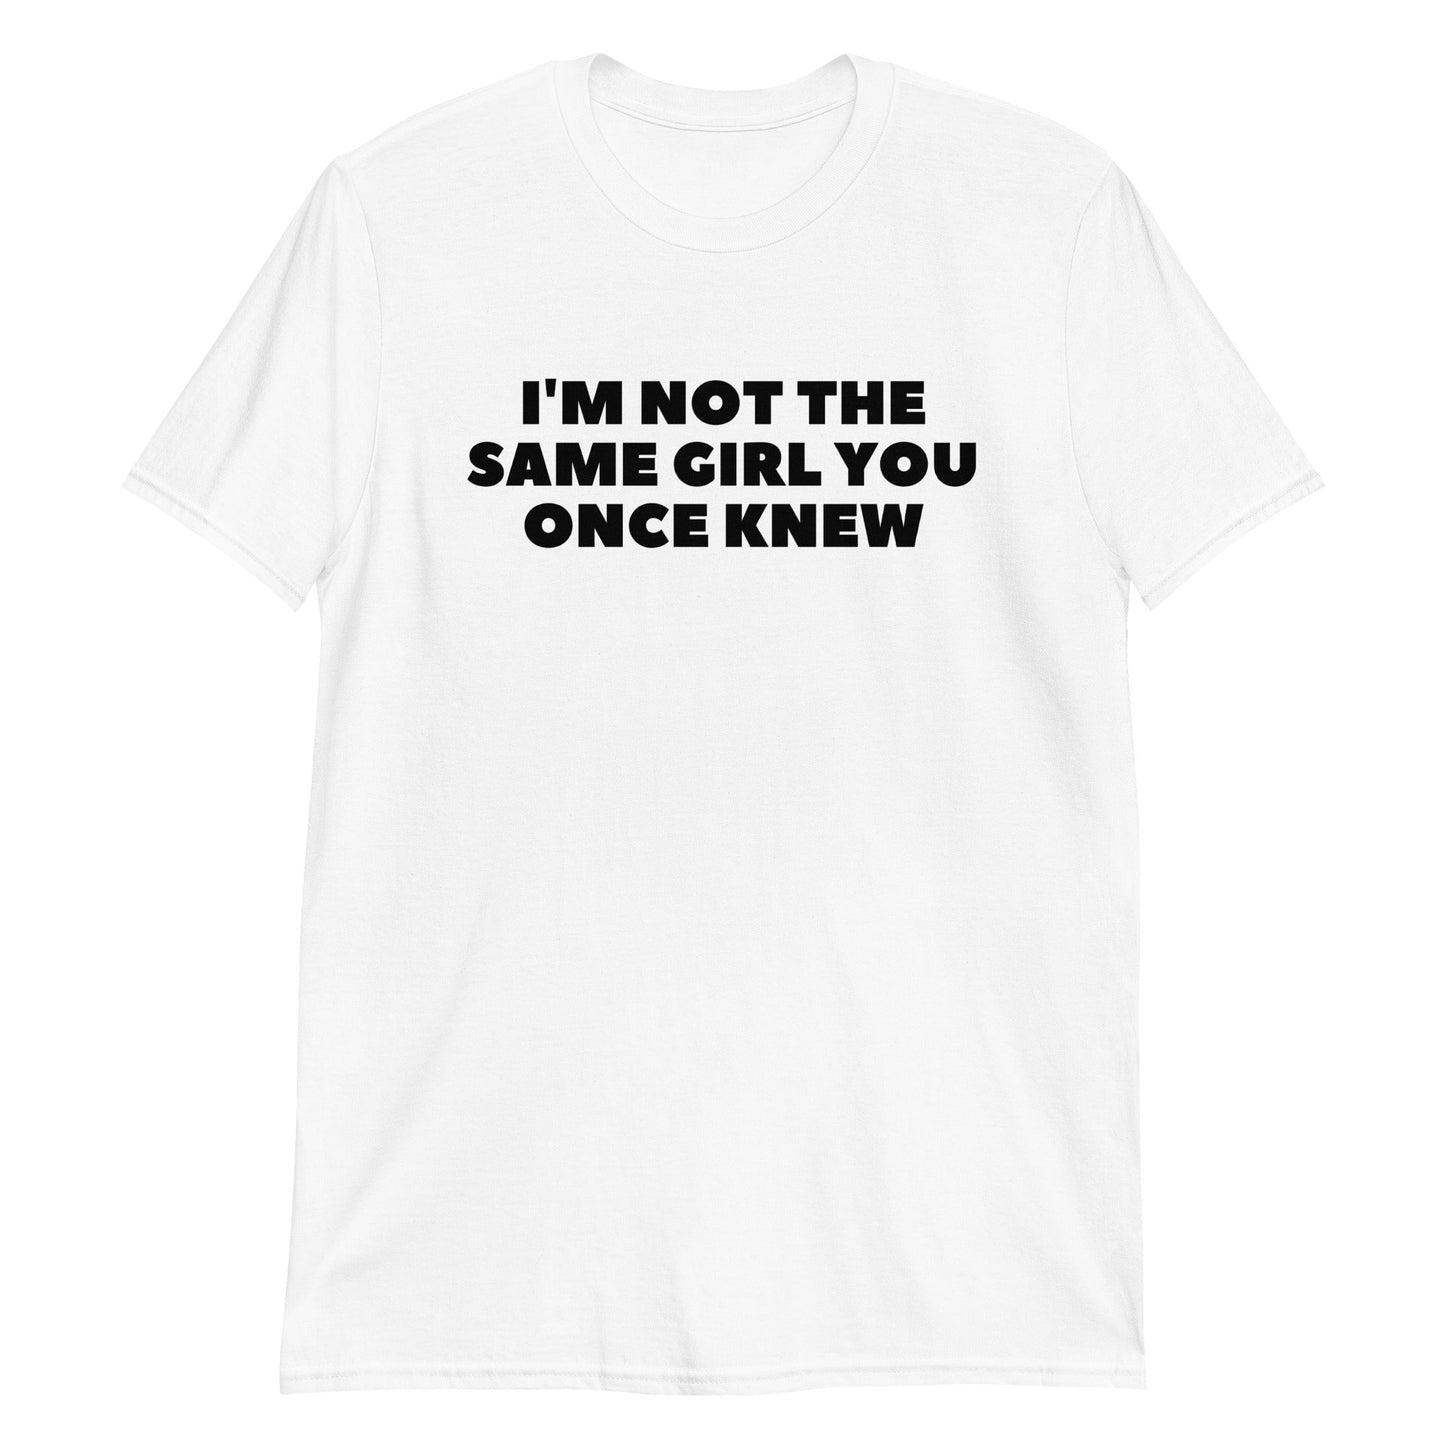 I'm Not The Same Girl You Once Knew Short-Sleeve Unisex T-Shirt (For a Slim Fit Order a Size Down) - Catch This Tea Shirts